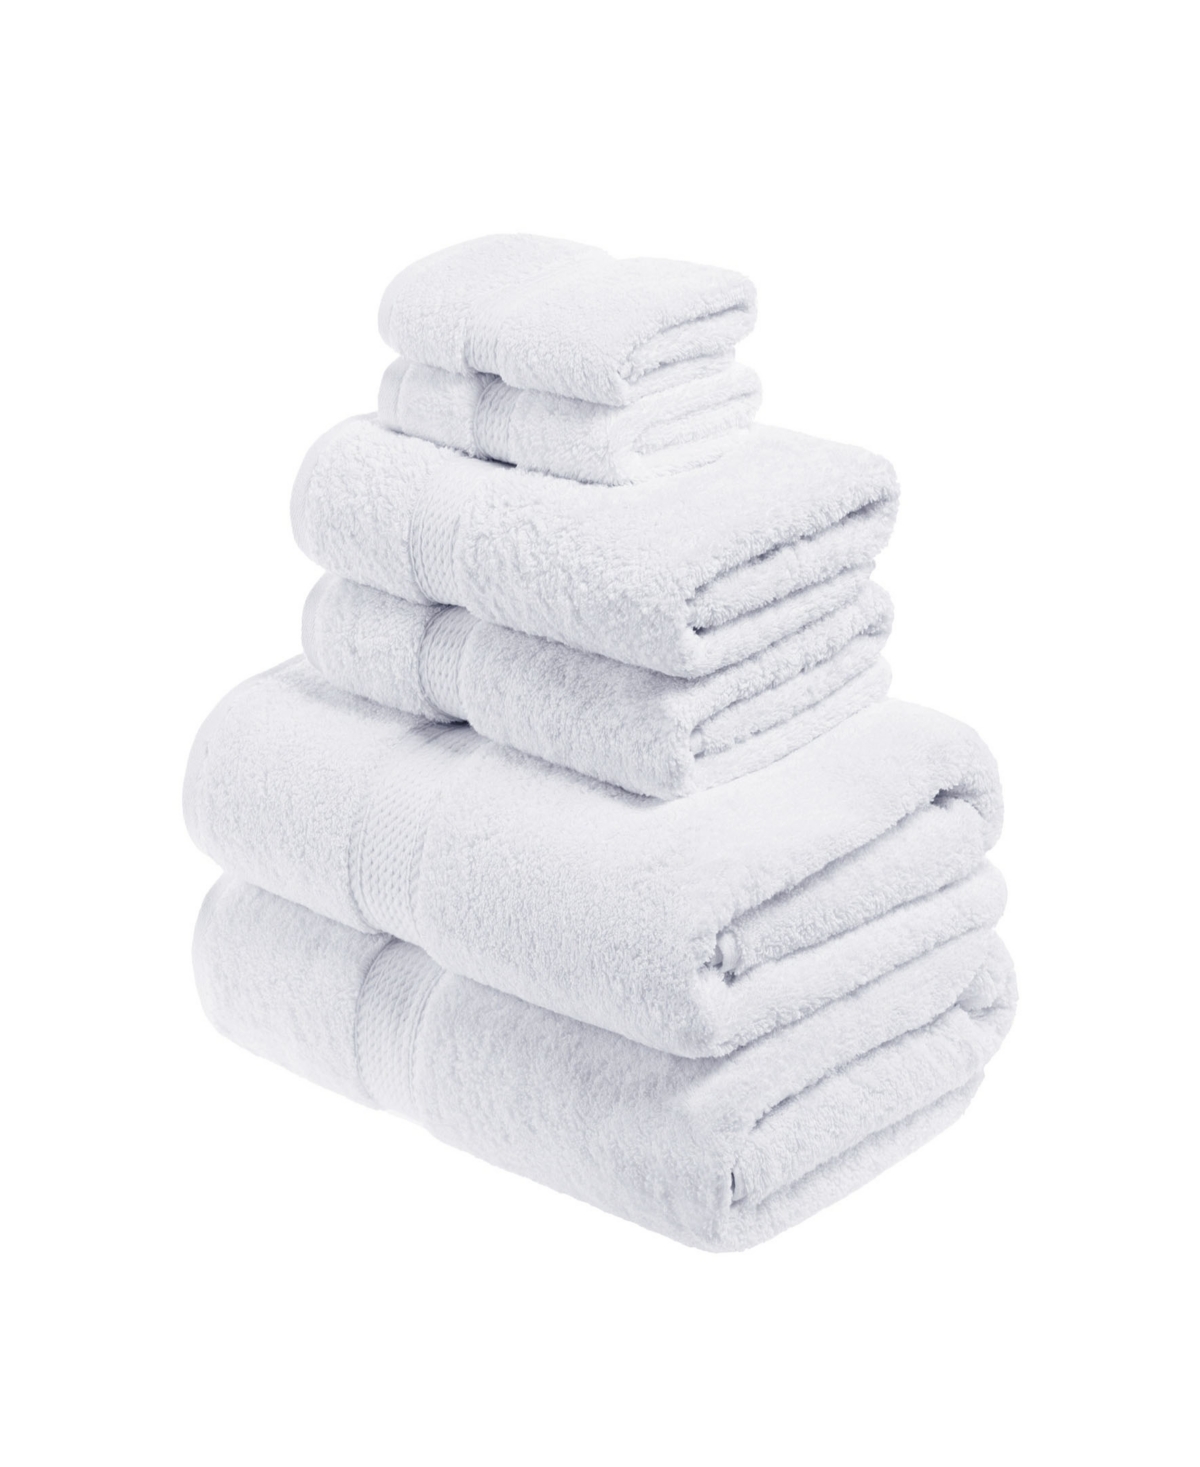 Superior Highly Absorbent 6 Piece Egyptian Cotton Ultra Plush Solid Assorted Bath Towel Set Bedding In White